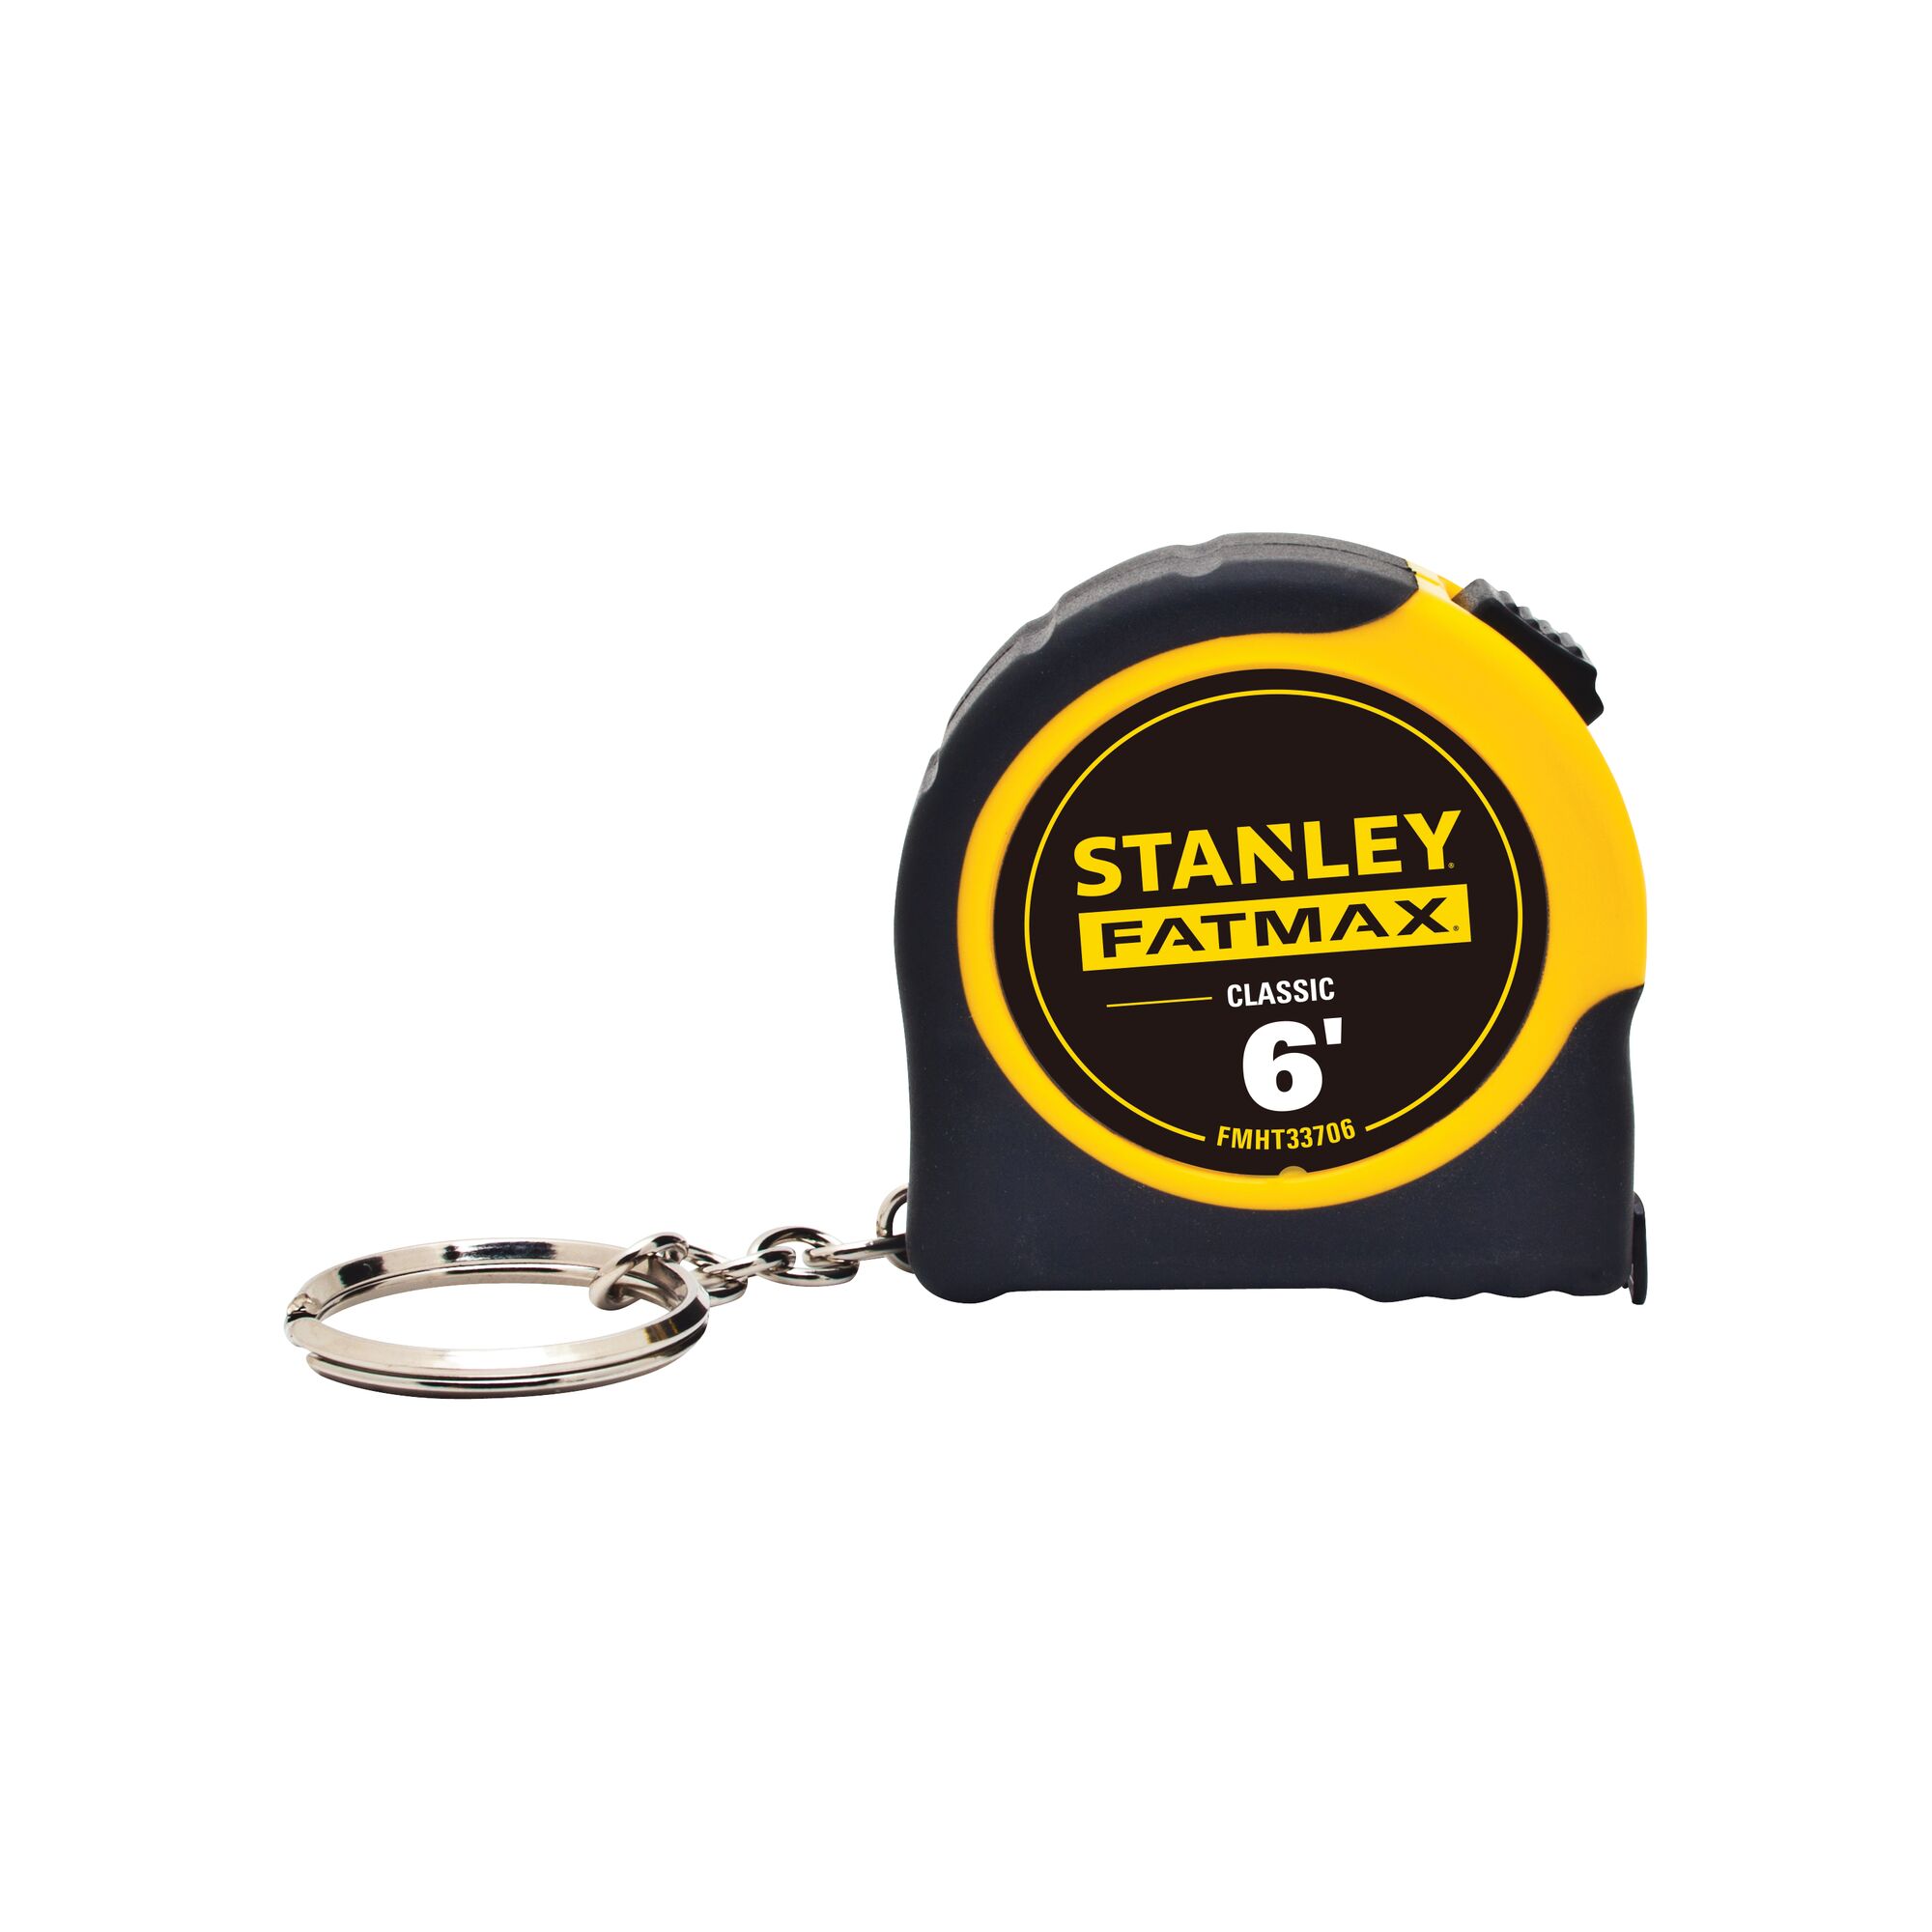 25 ft High-Visibility Tape Measure | STANLEY